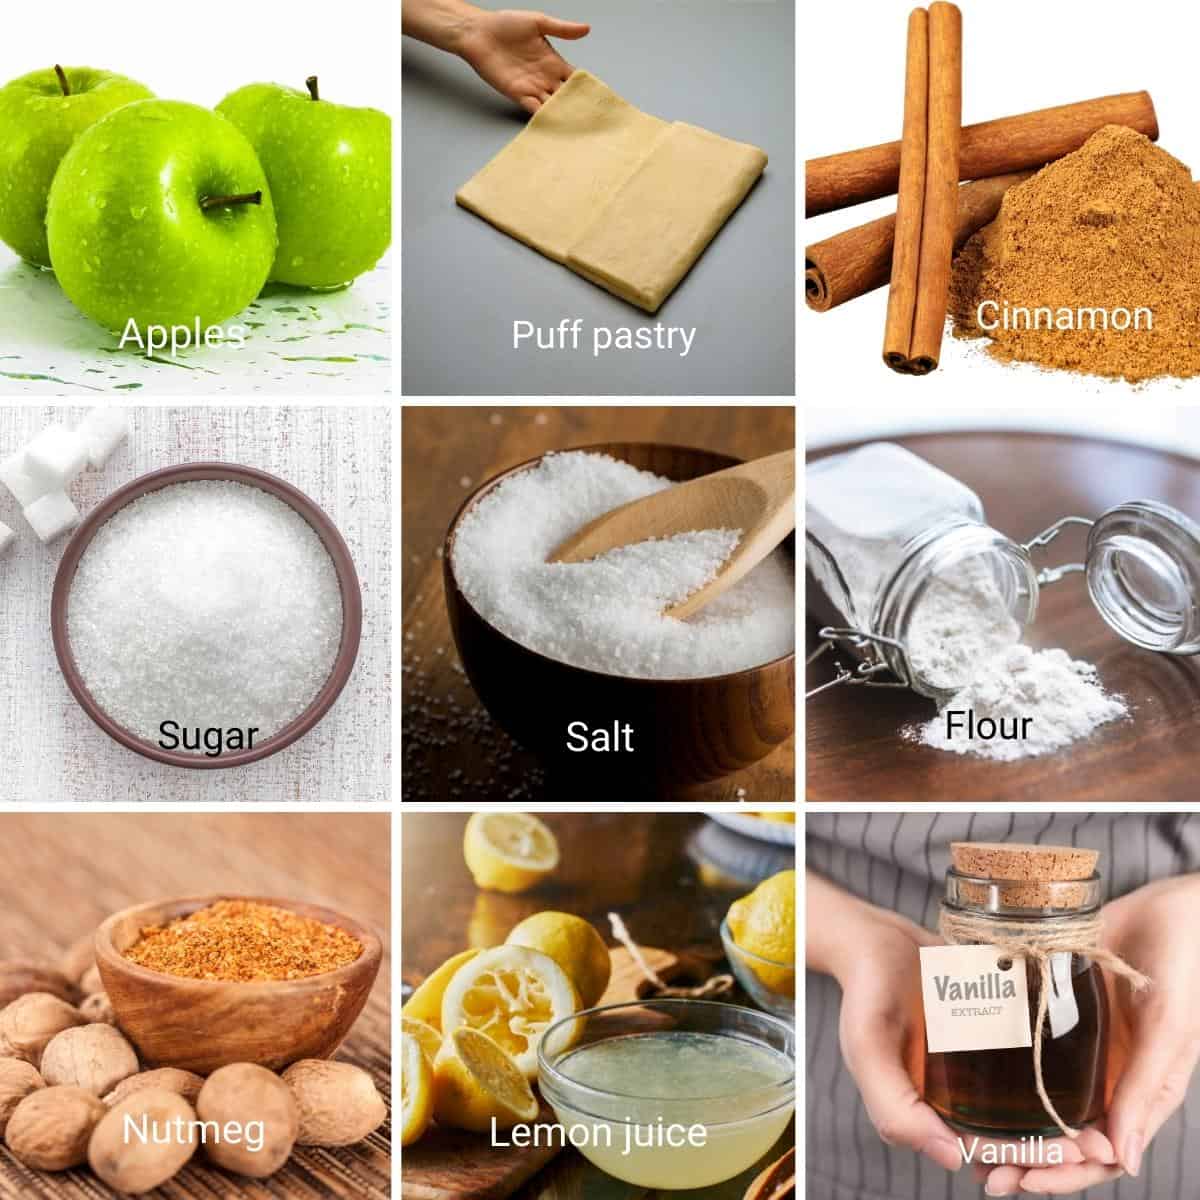 Ingredients for making apple pie with puff pastry.